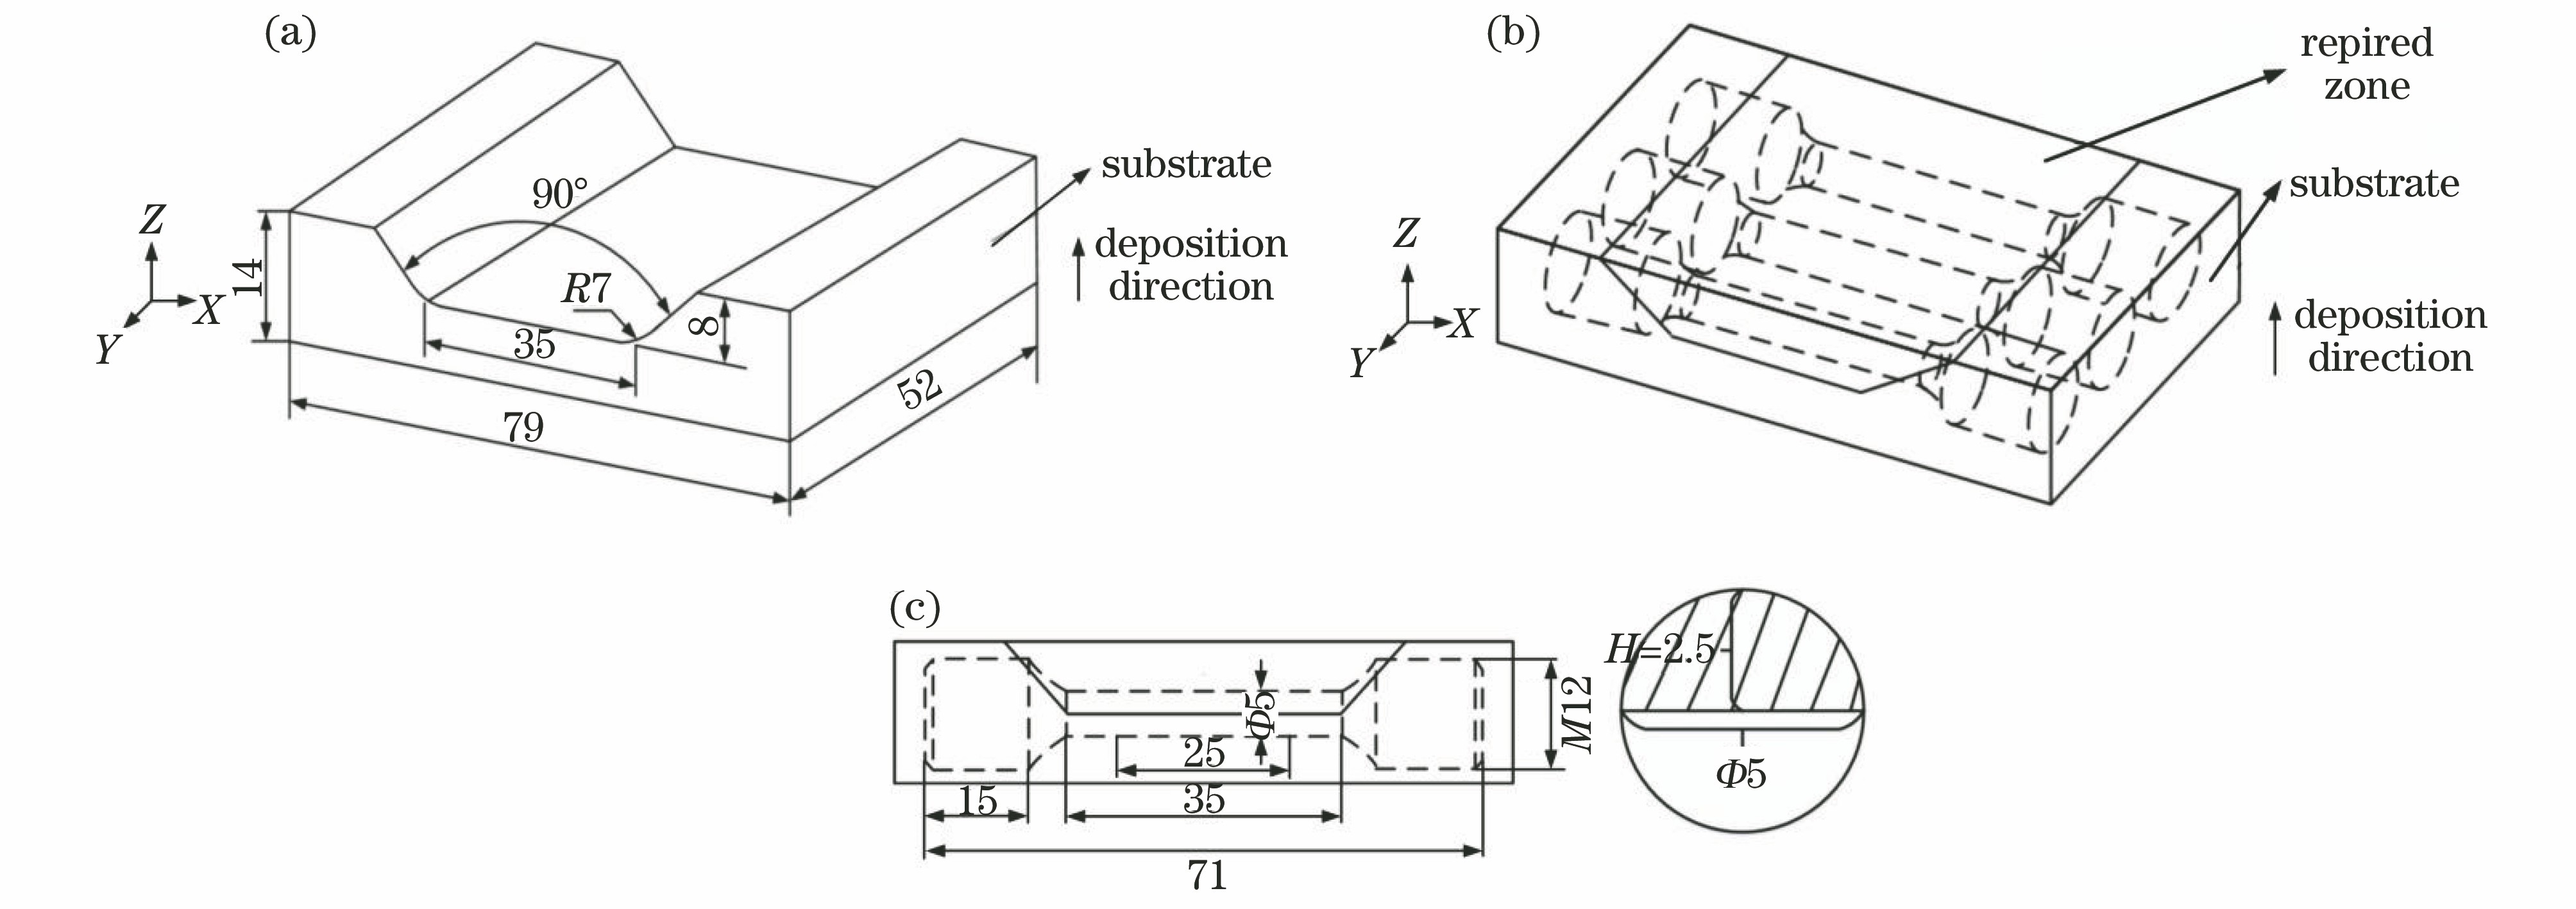 Schematics. (a) Substrate; (b) sampling for tensile samples; (c) size of tensile samples